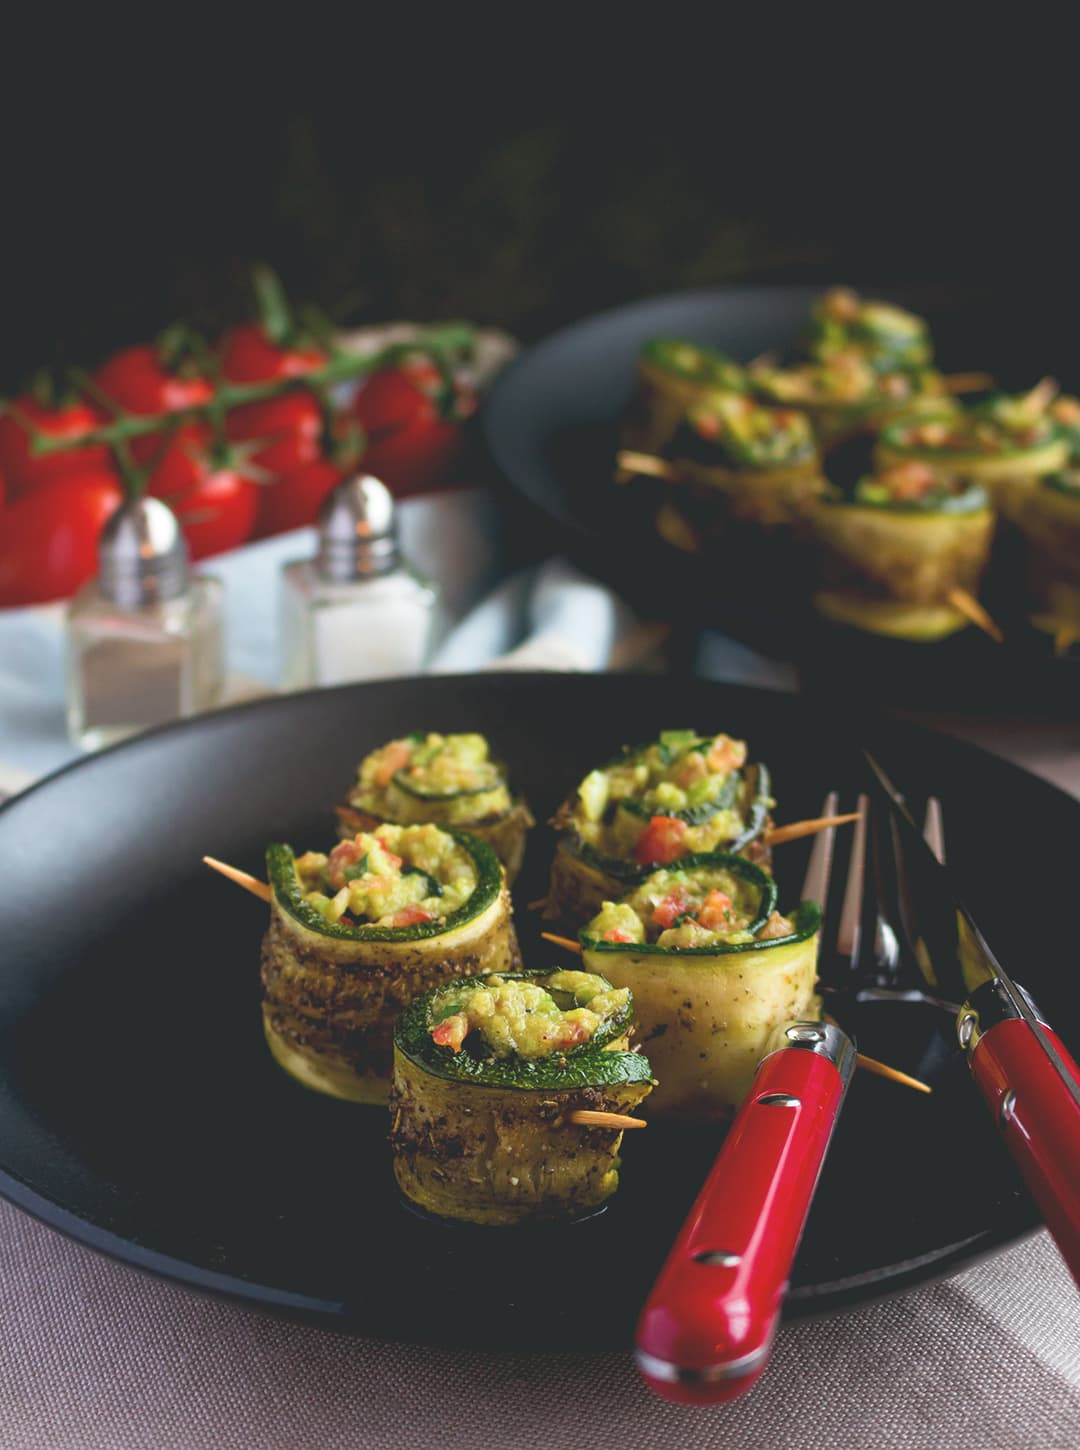 Roasted Zucchini Rolls with Guacamole - the perfect vegan appetizer for a movie night or a great first course in a Mexican styled menu! I love these. So simple, so delicious! | thehealthfulideas.com